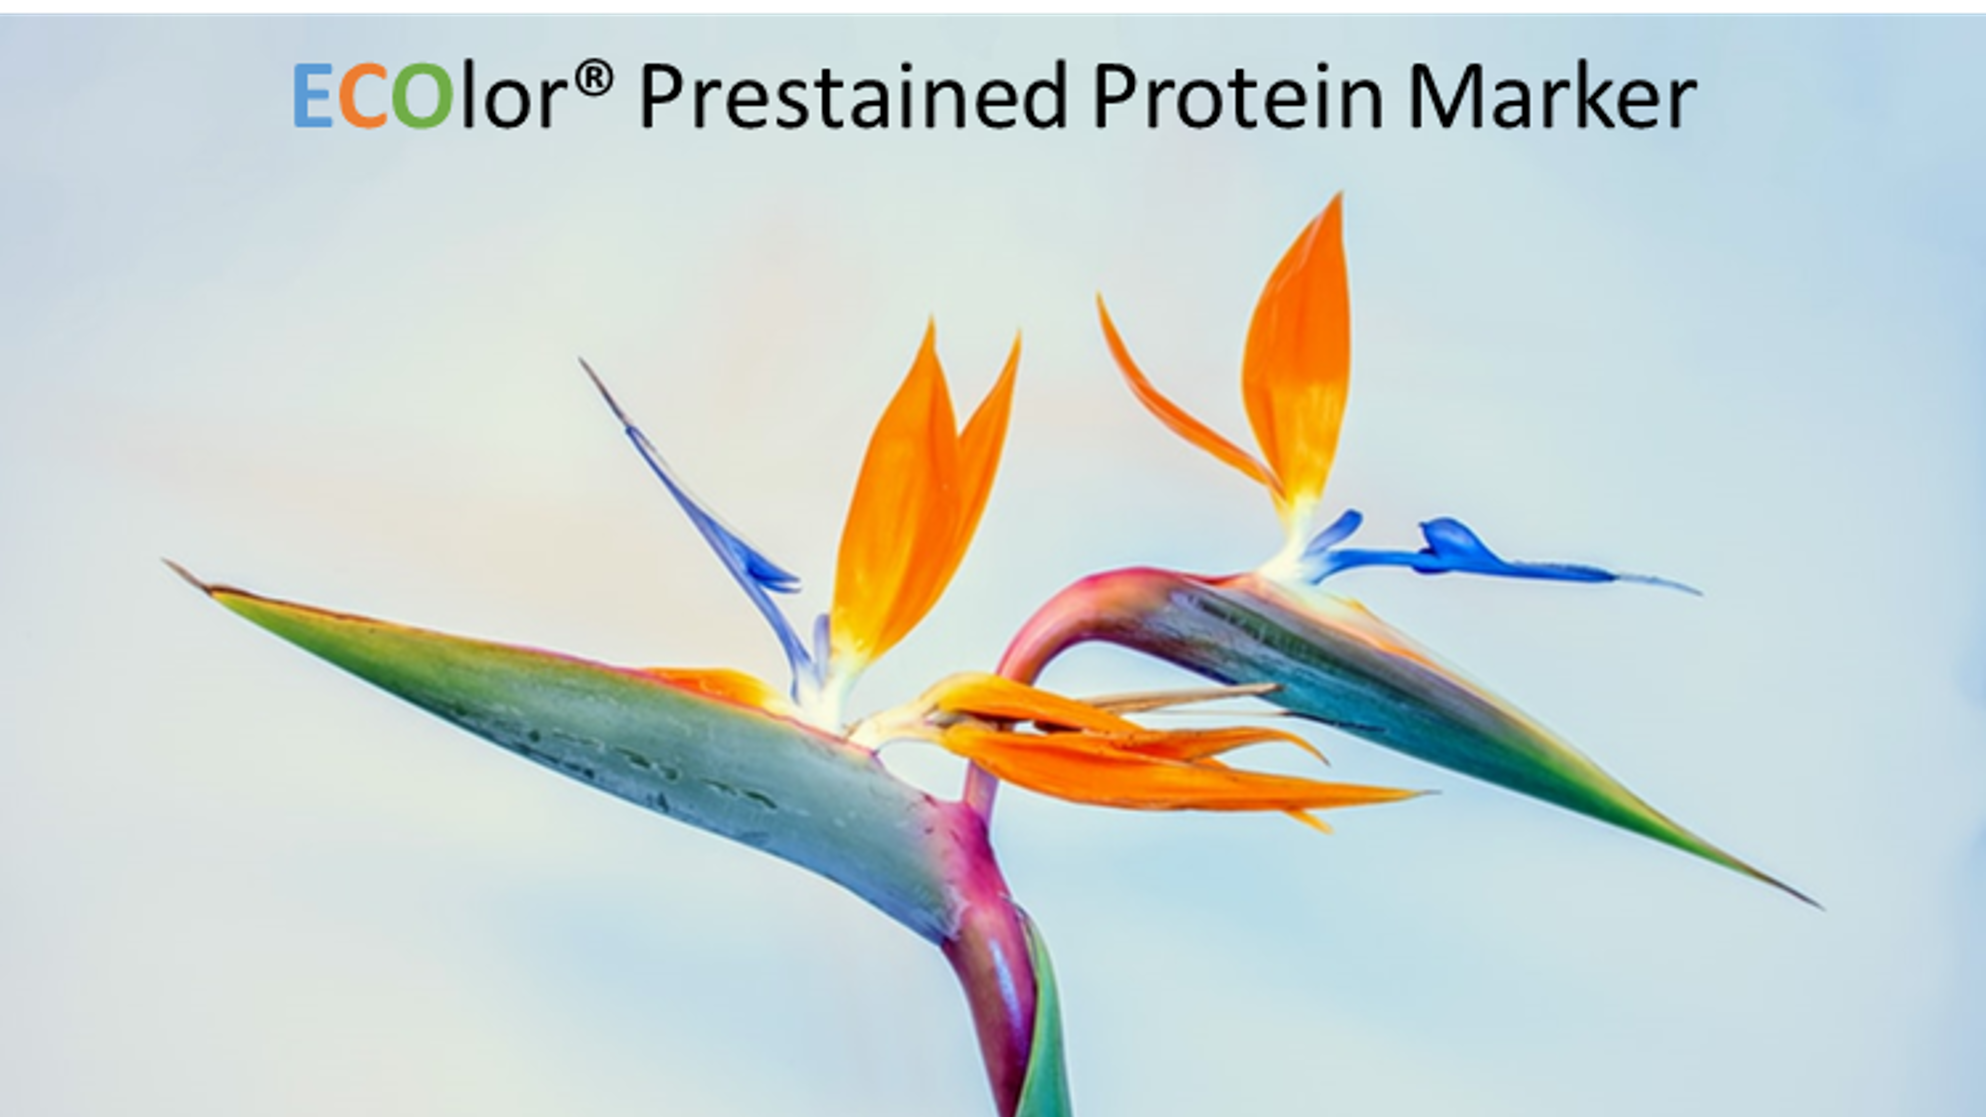 Ecolor prestained protein marker